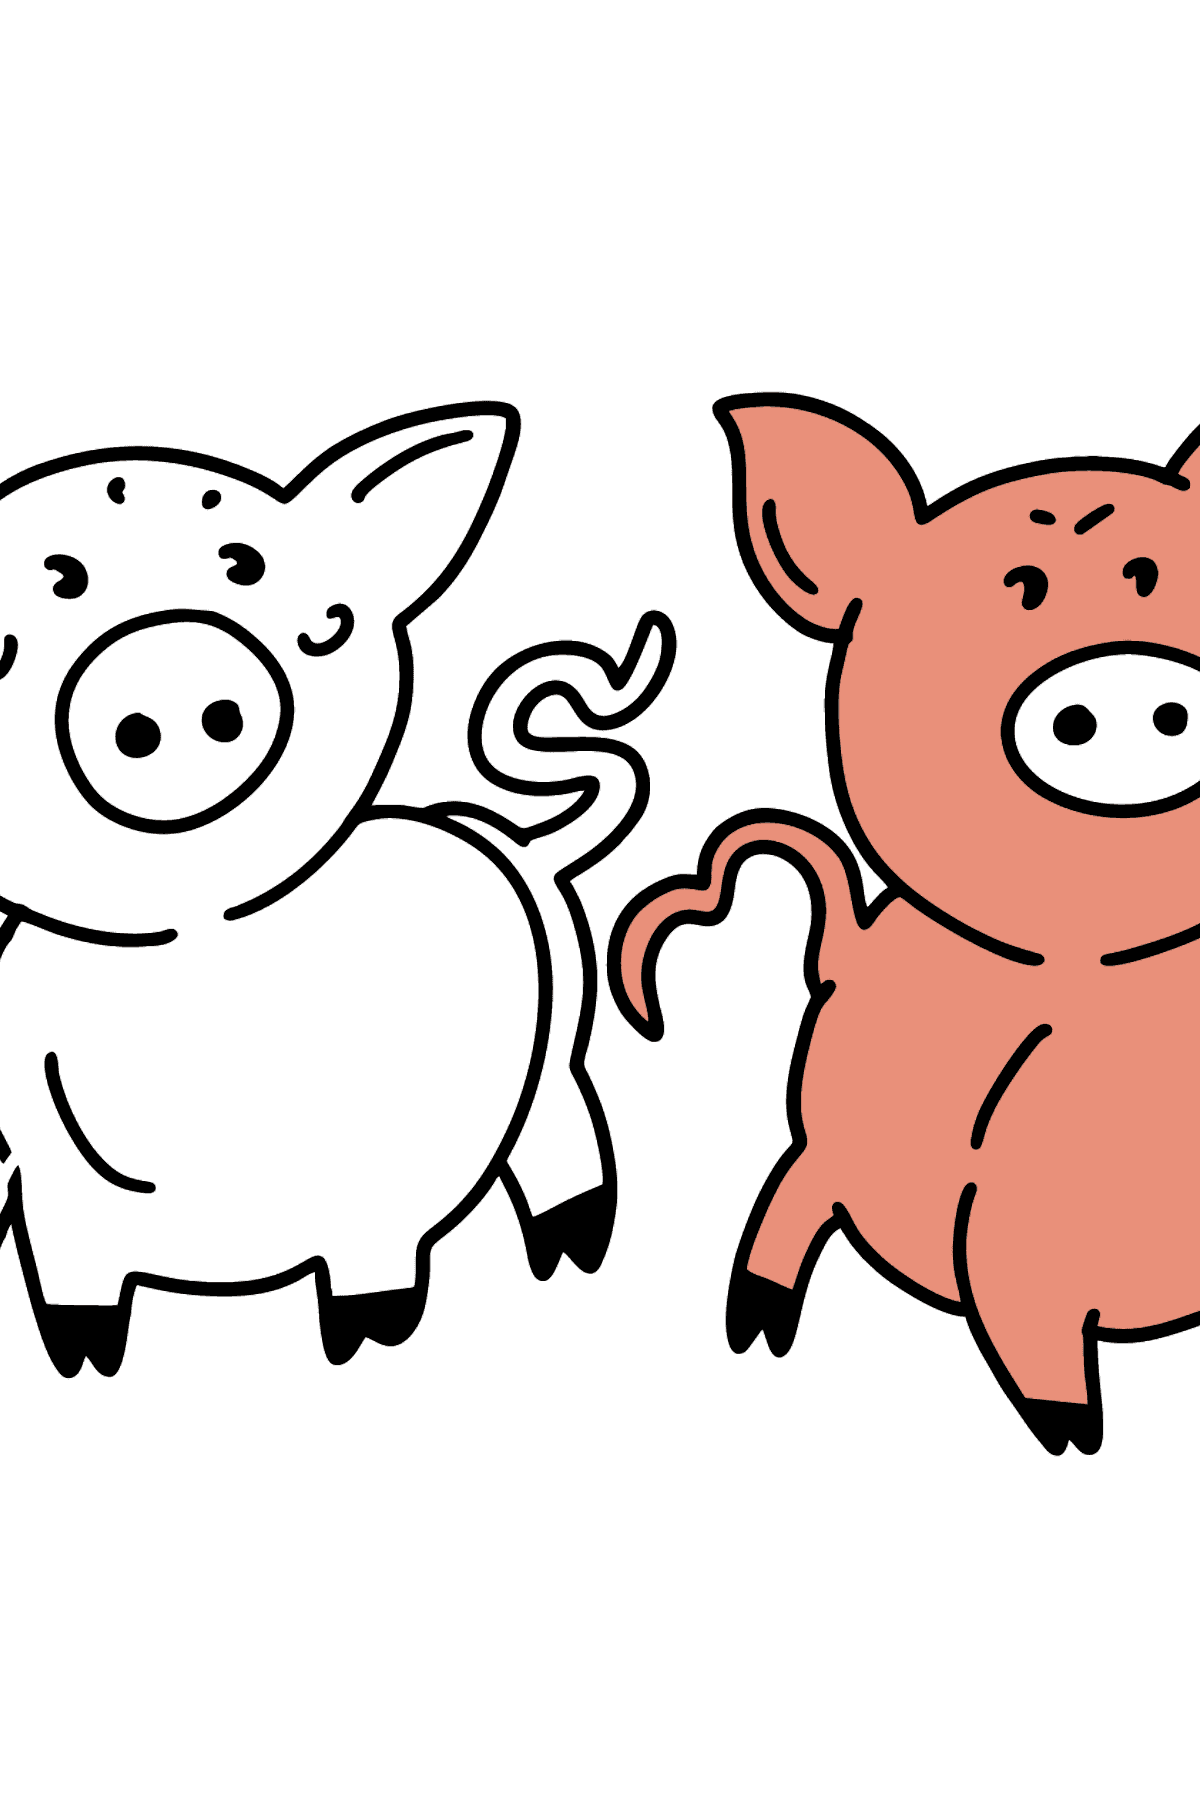 Piglets coloring page - Coloring Pages for Kids